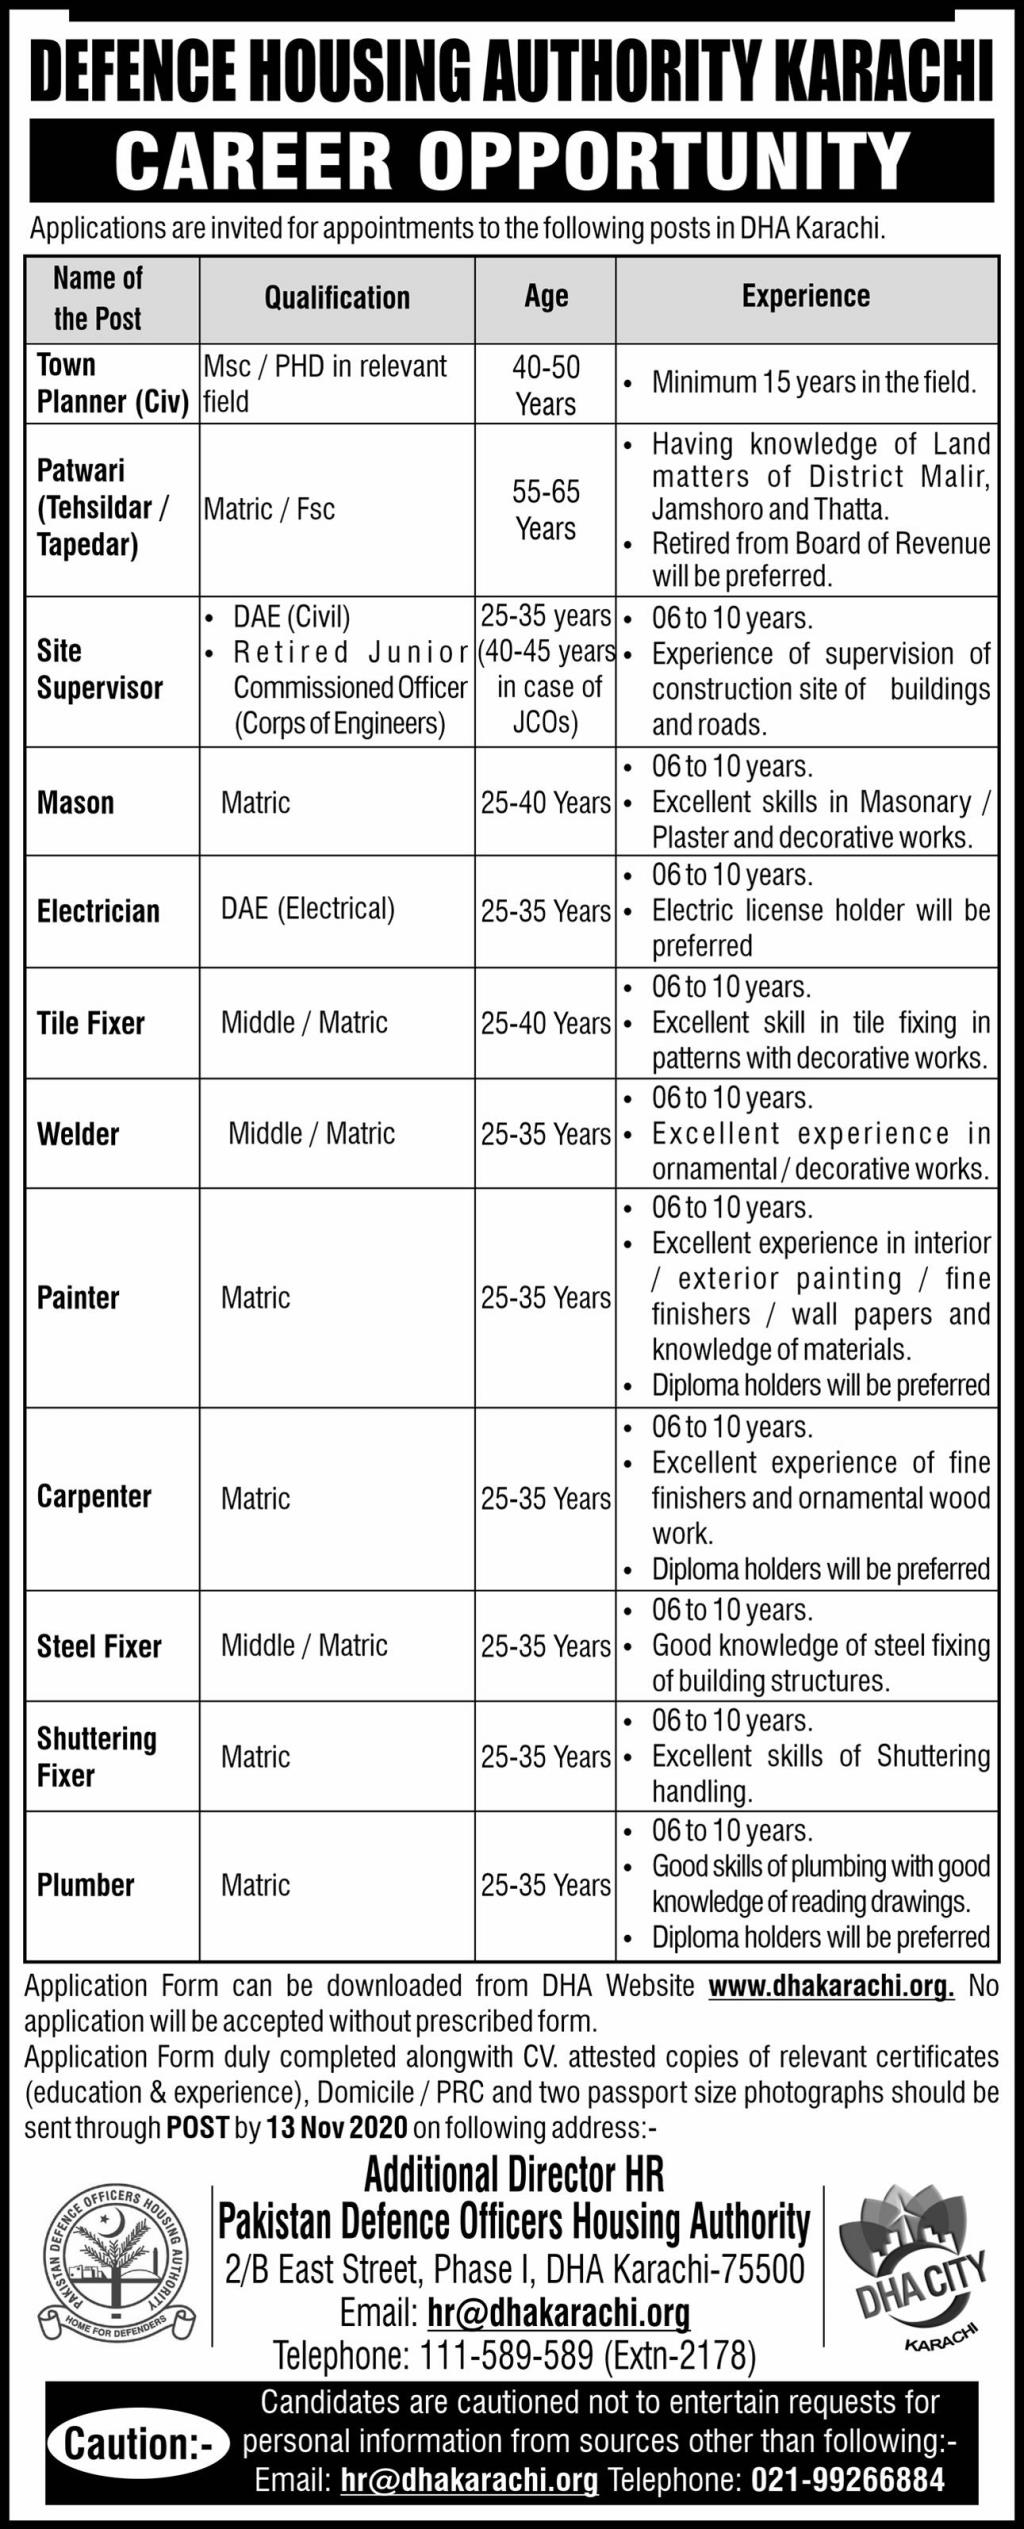 Jobs in Karachi Defence Housing Authority (DHA)